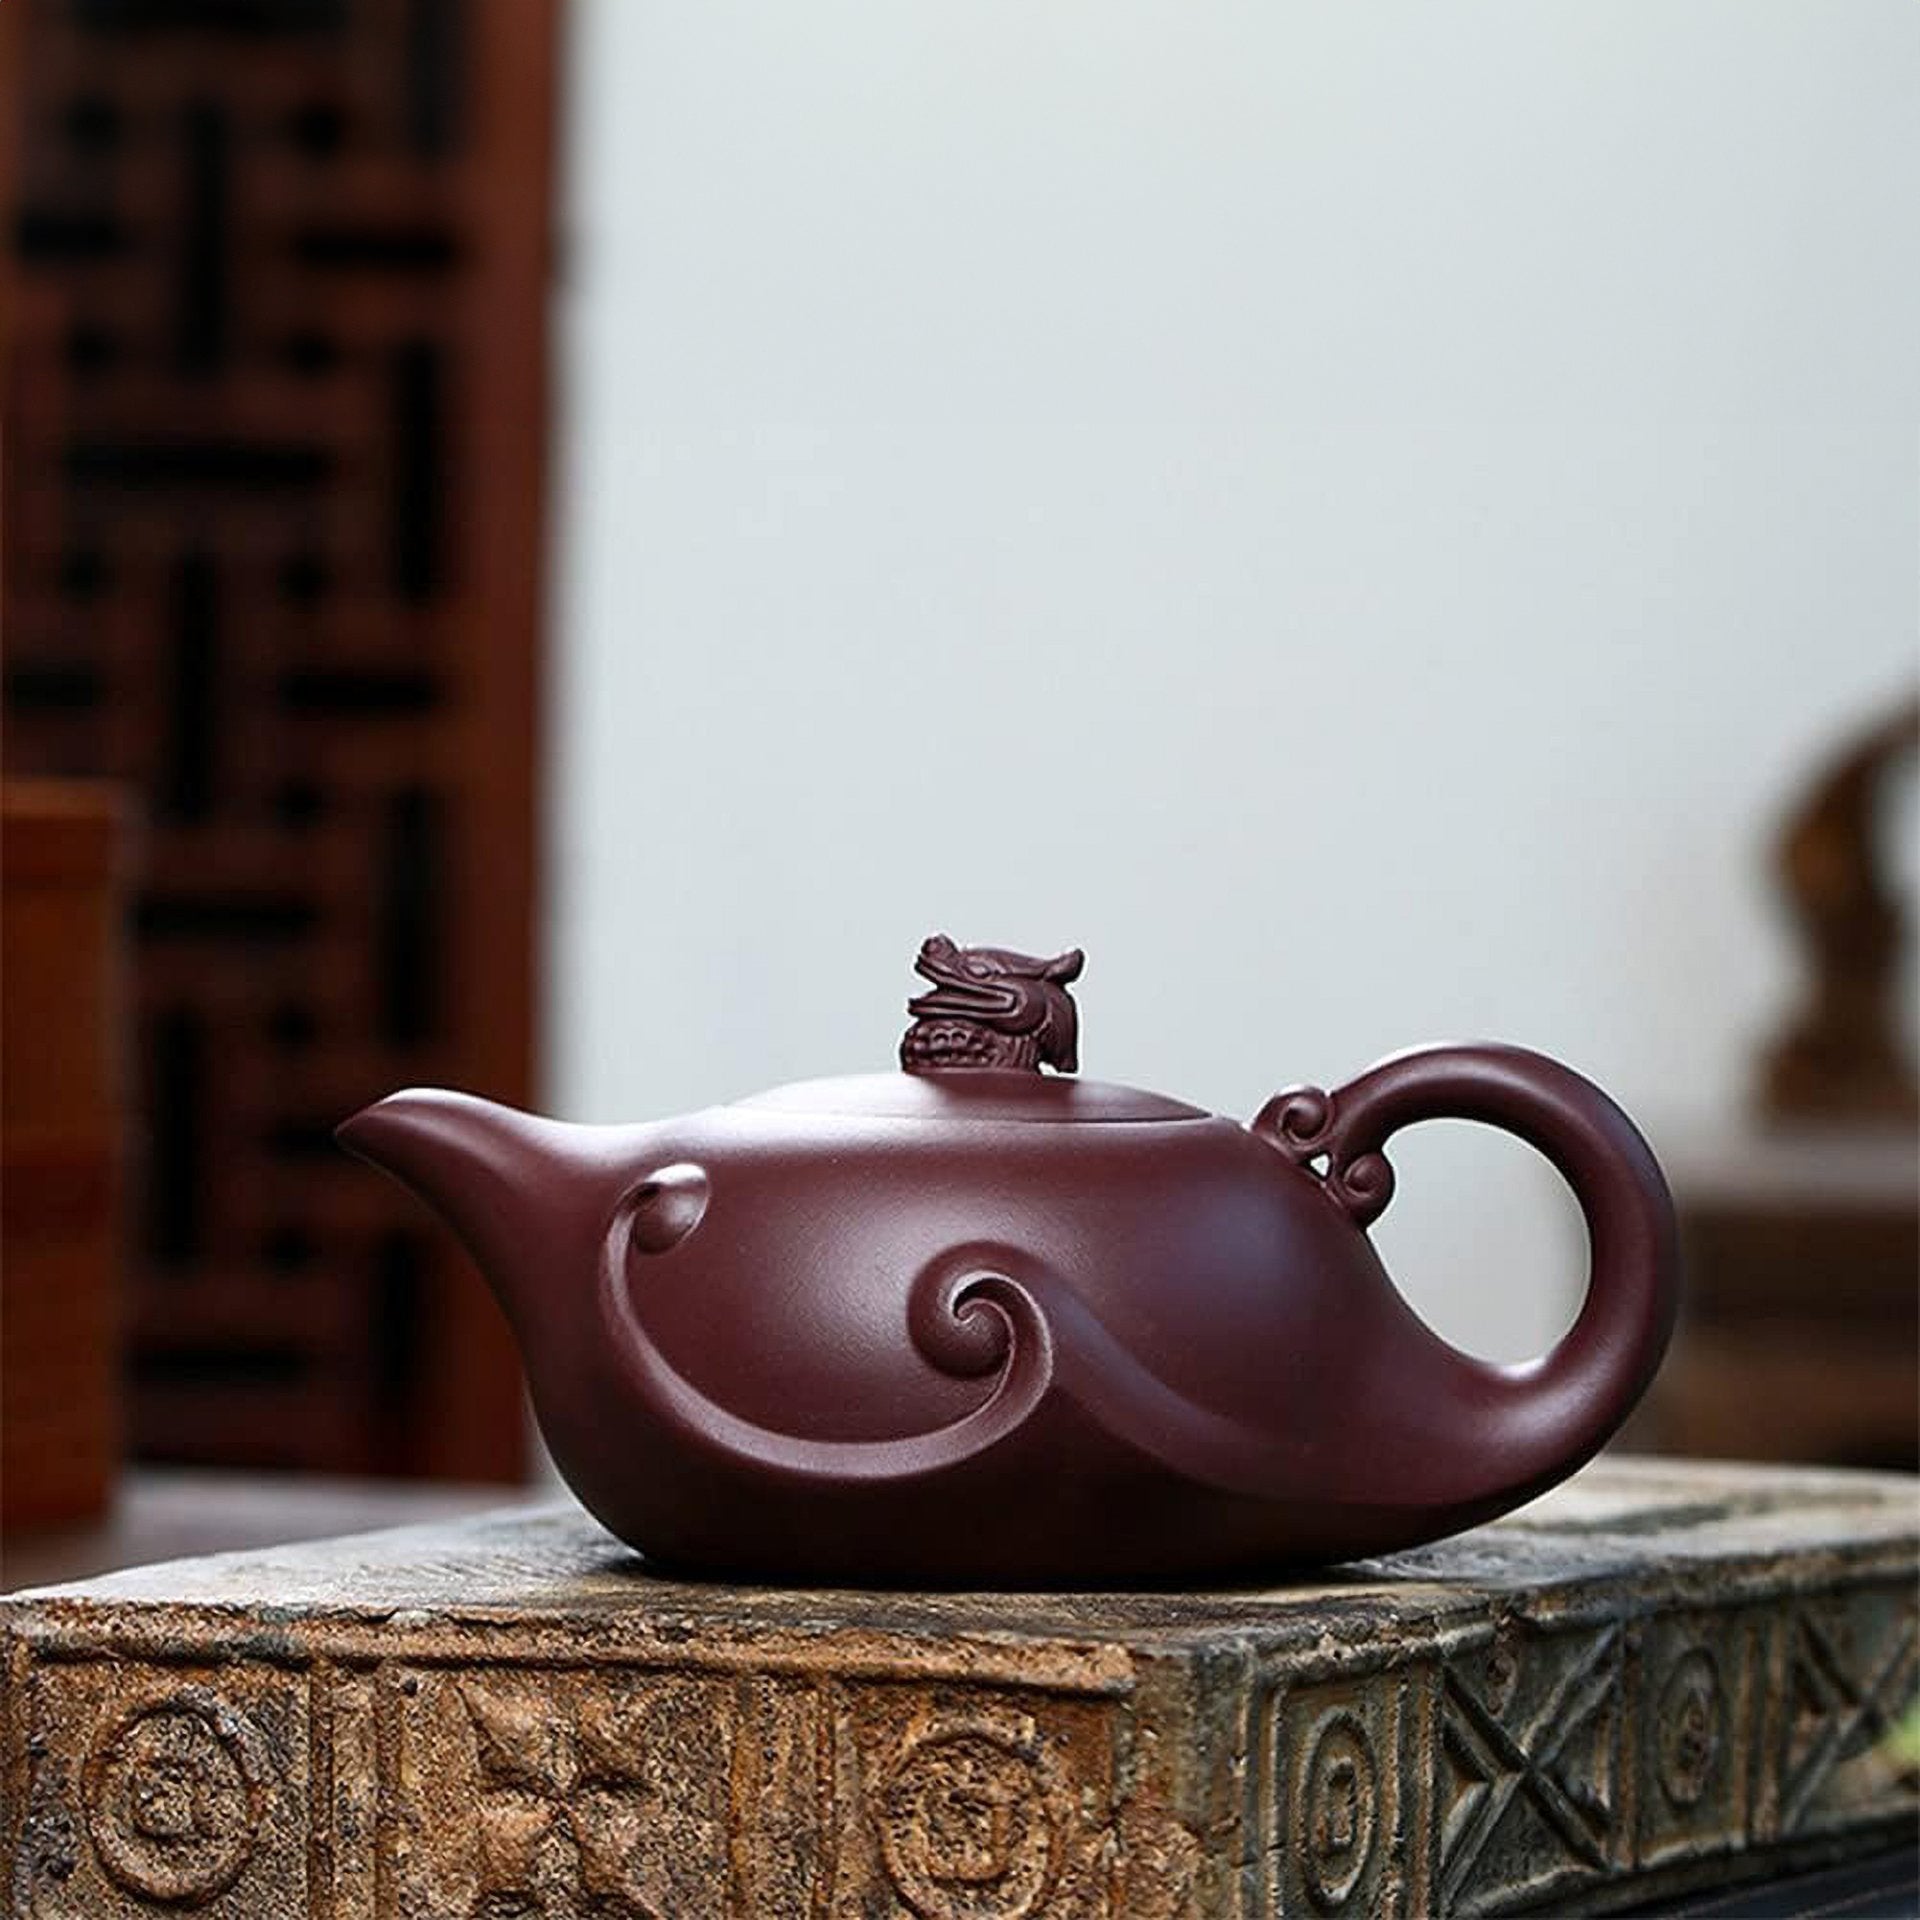 Dark brown teapot with dragon on lid, sitting on an ancient wooden surface.